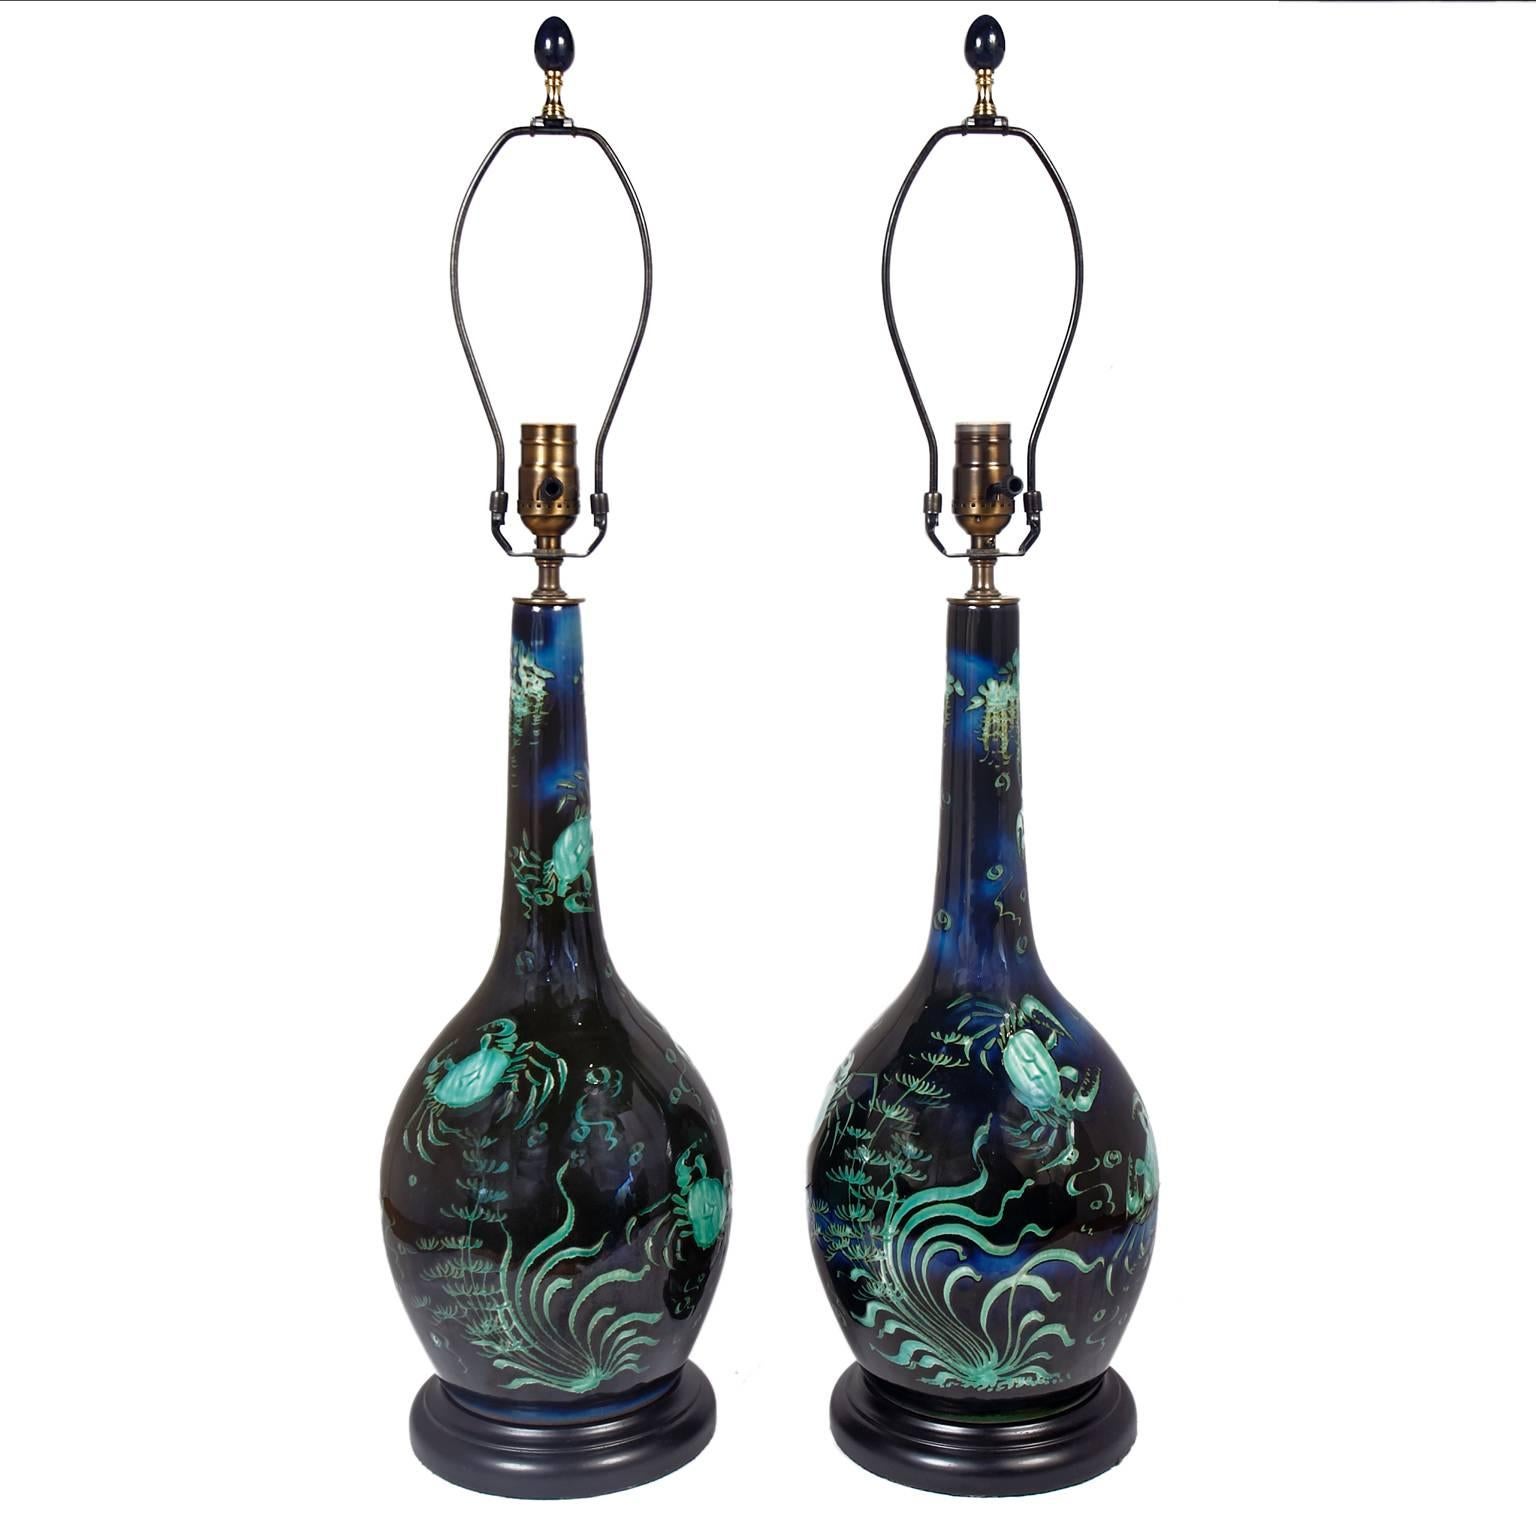 Modern Pair of Deep Blue Ceramic Lamps with Turquoise Green Crabs and Ocean Plants